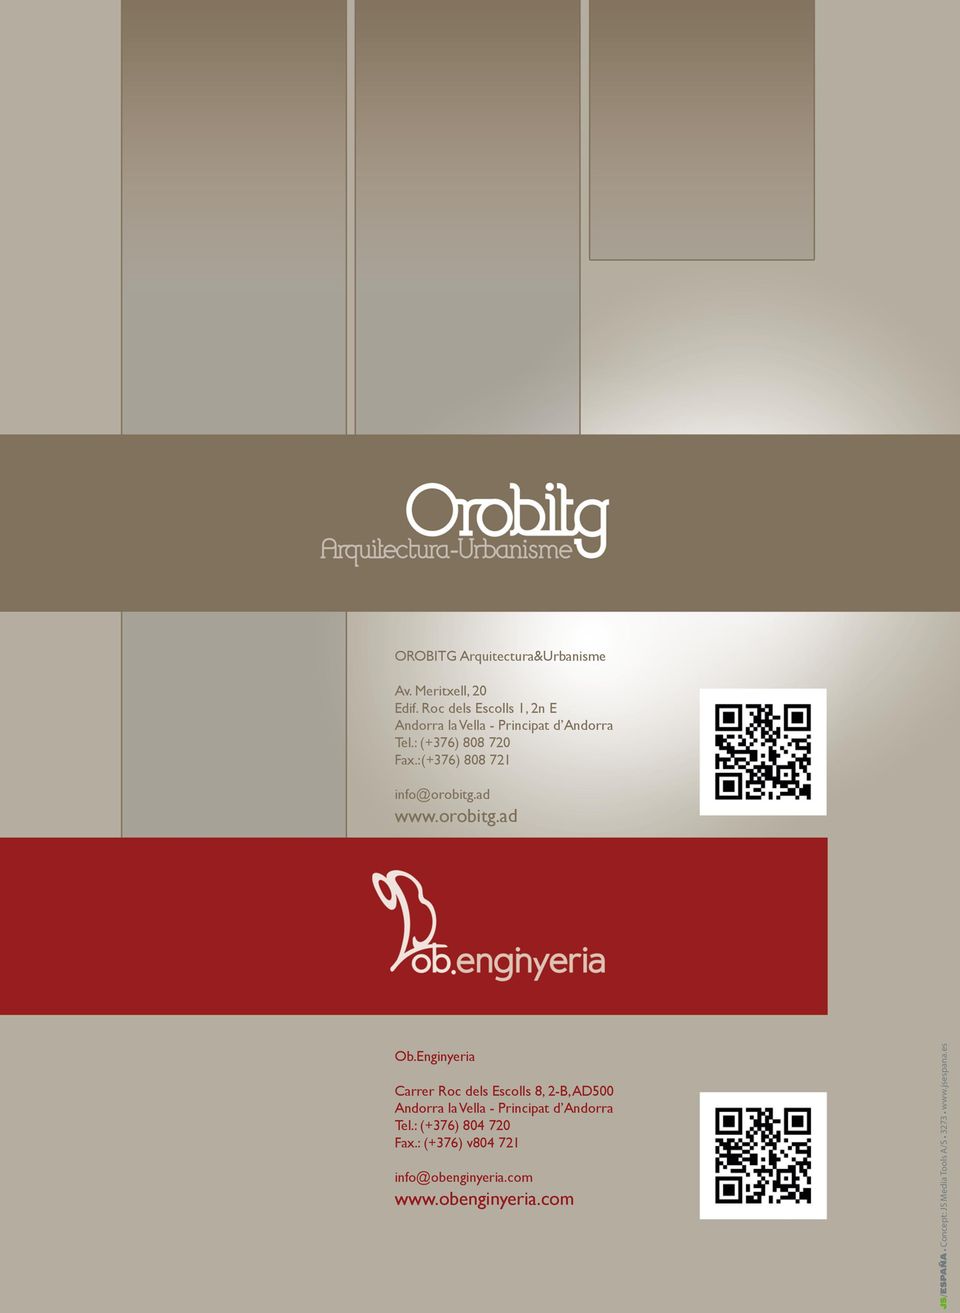 :(+376) 808 721 info@orobitg.ad www.orobitg.ad Ob.